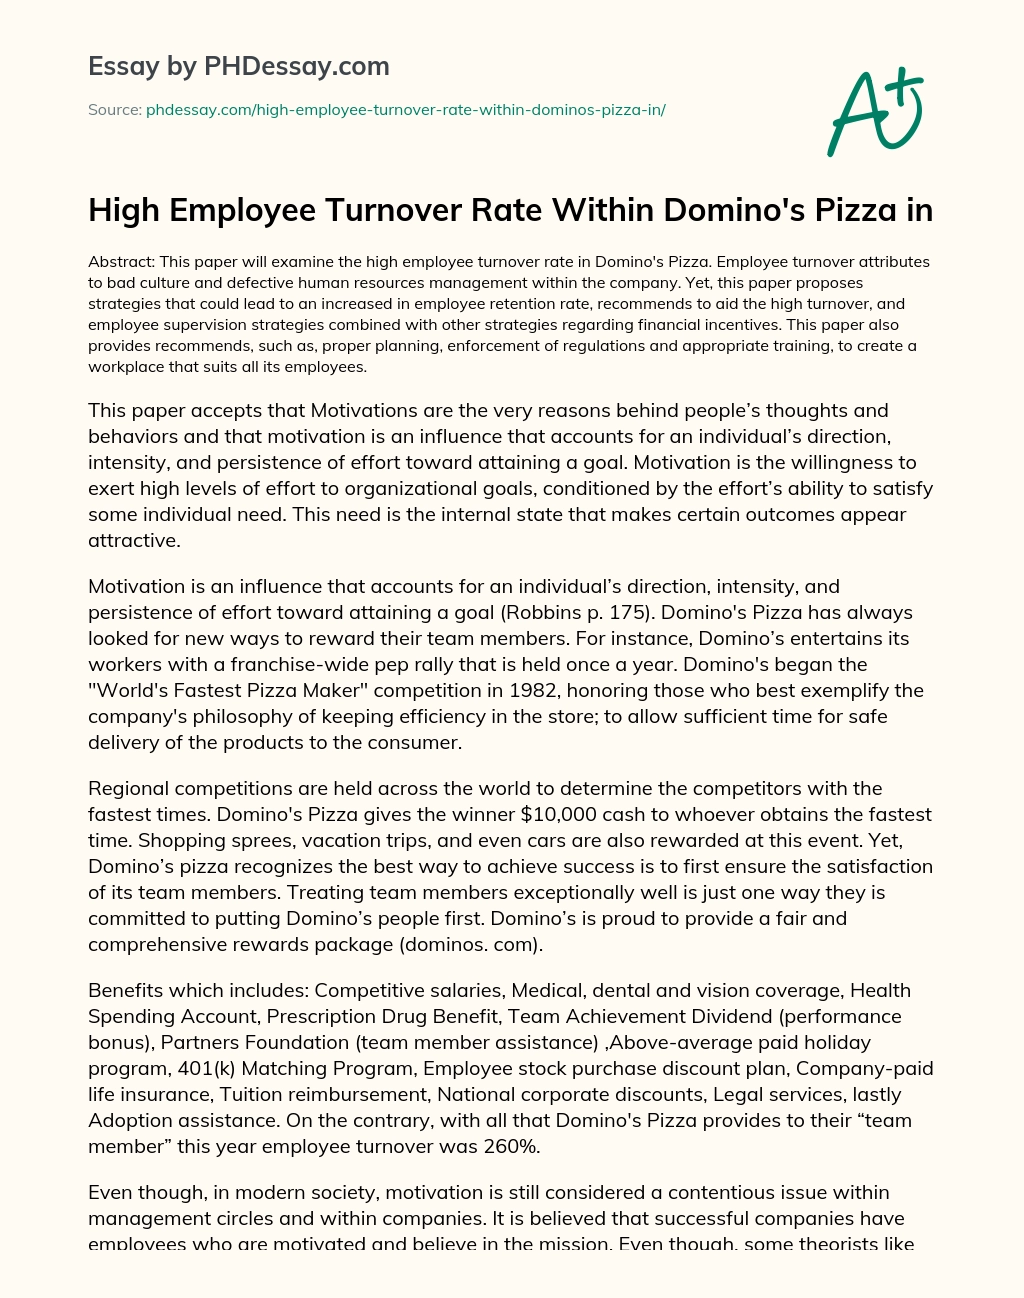 High Employee Turnover Rate Within Domino’s Pizza in essay